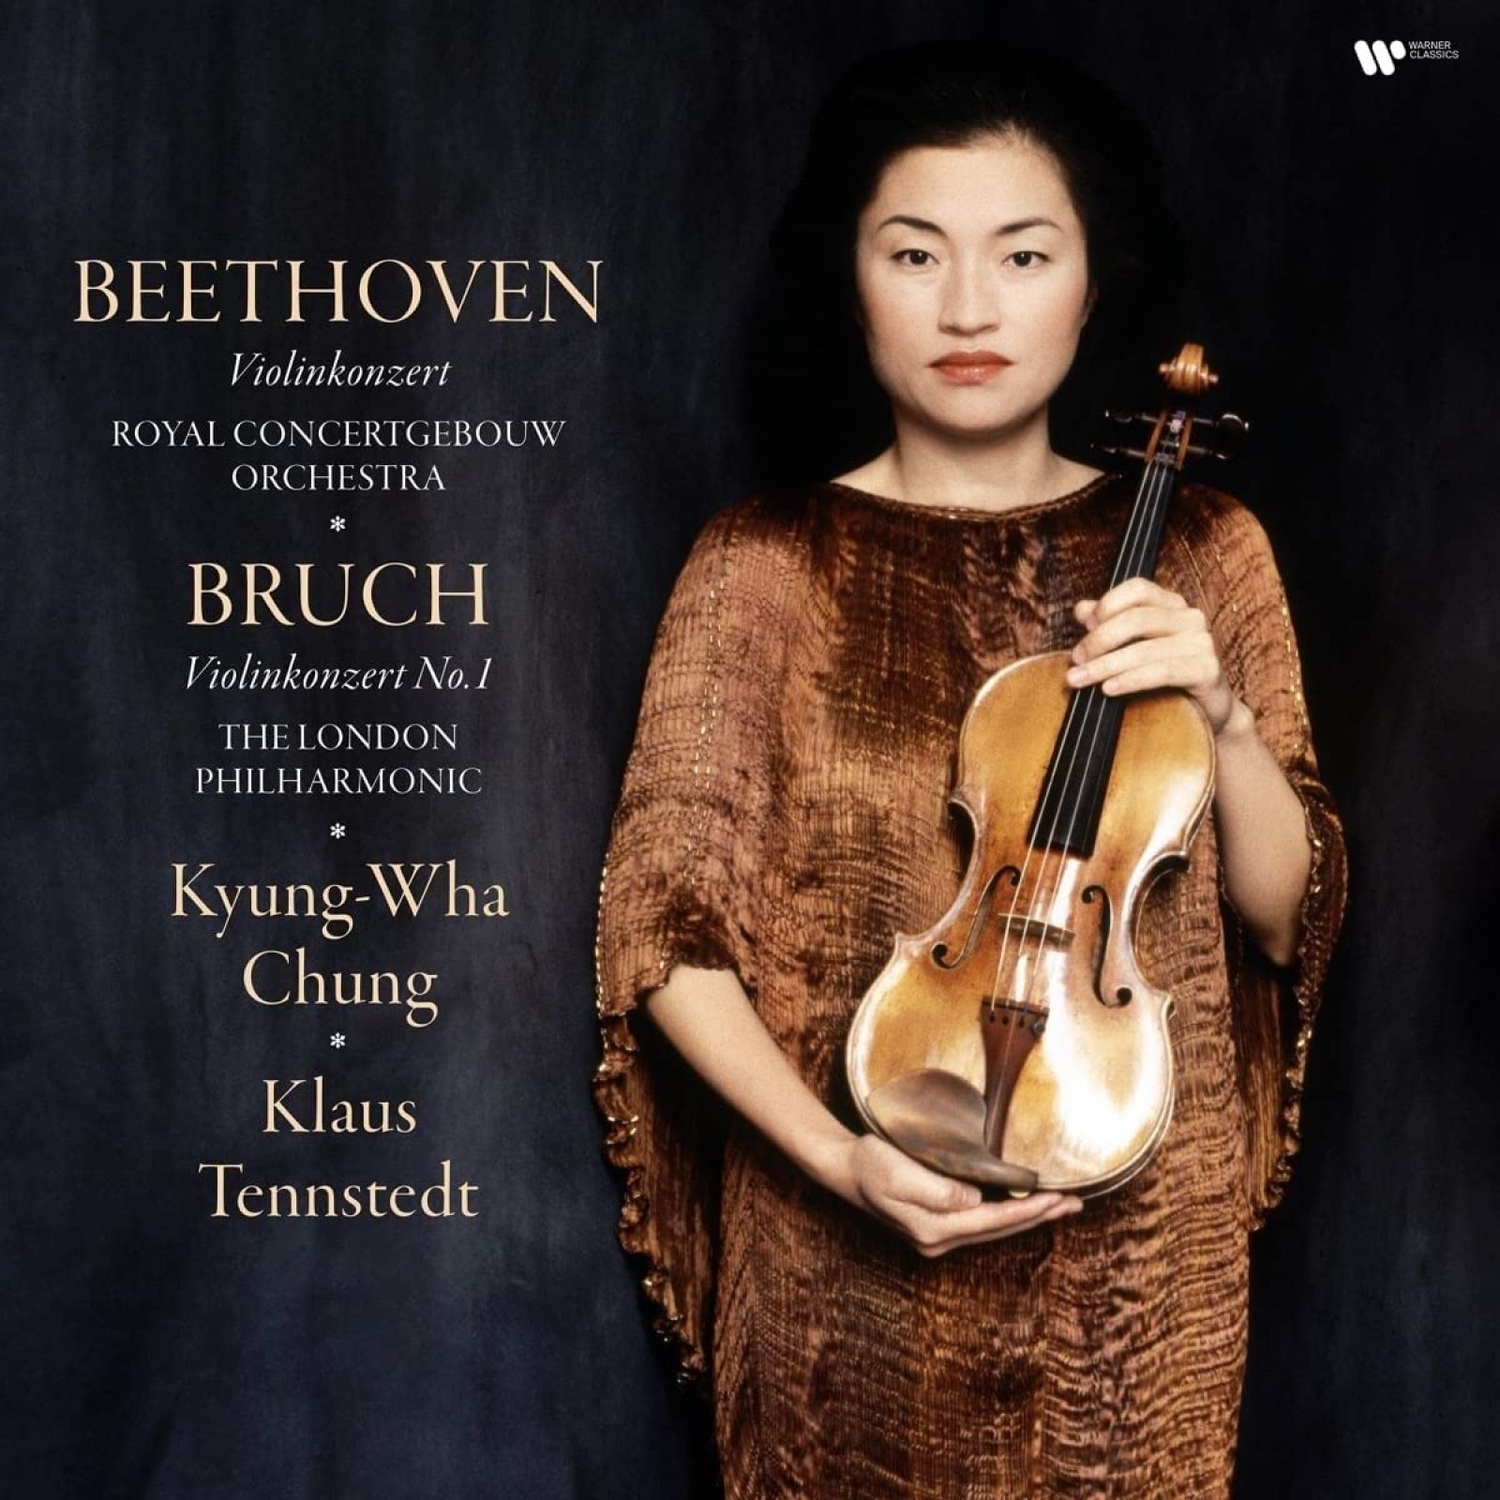 Виниловая Пластинка Kyung-Wha Chung, Klaus Tennstedt, The London Philharmonic, Concertgebouw Orchestra, Beethoven & Bruch: Violin Concertos (0190296333750) taplin sam the animal orchestra plays beethoven